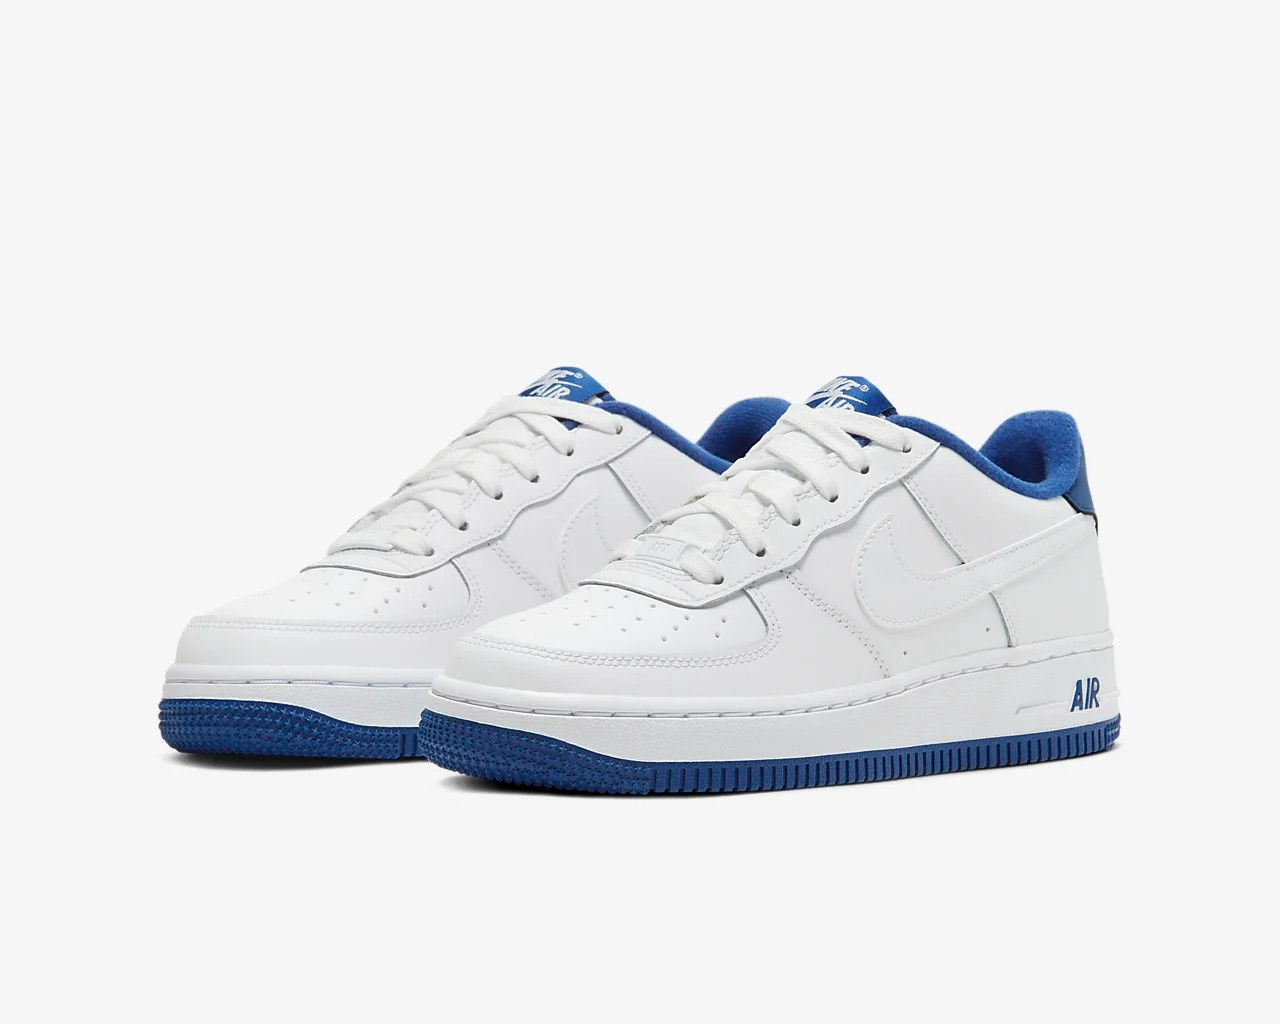 102 - Nike Air Force 1 Low GS White Deep Royal Blue CD6915 GmarShops - nike air woven price in india today pakistan live